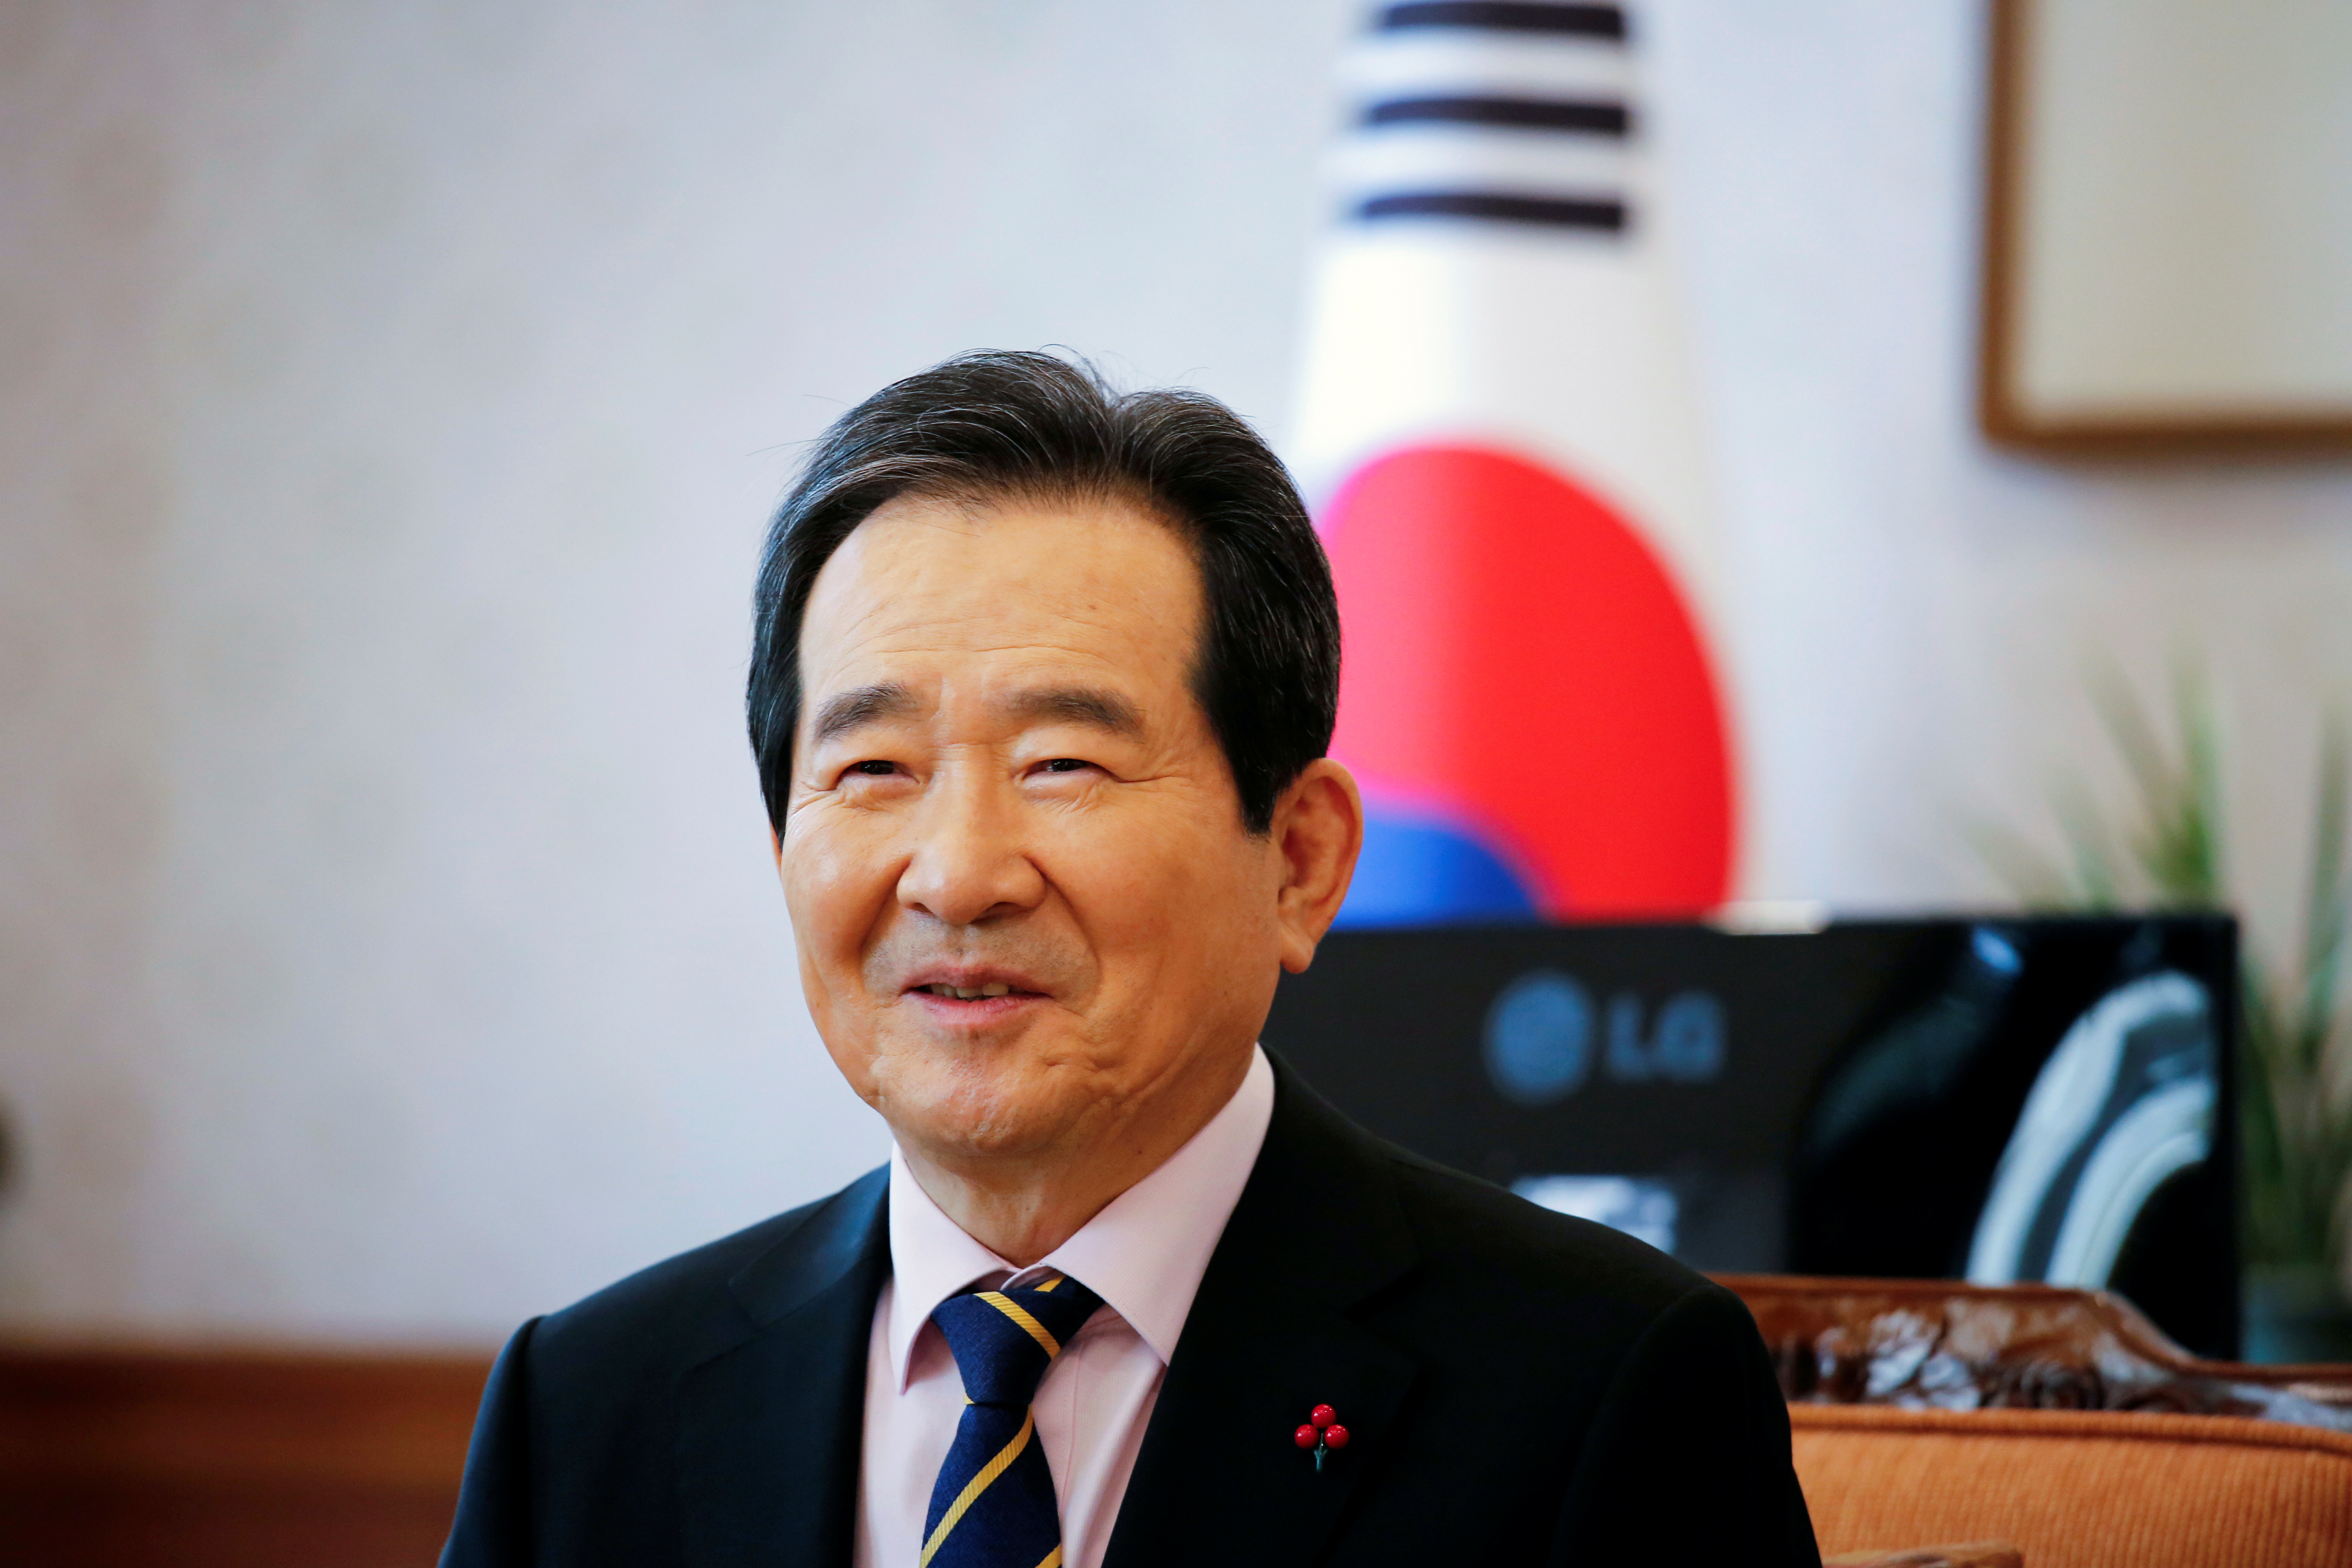 South Korea's Prime Minister Chung Sye-kyun speaks during an interview with Reuters in Seoul